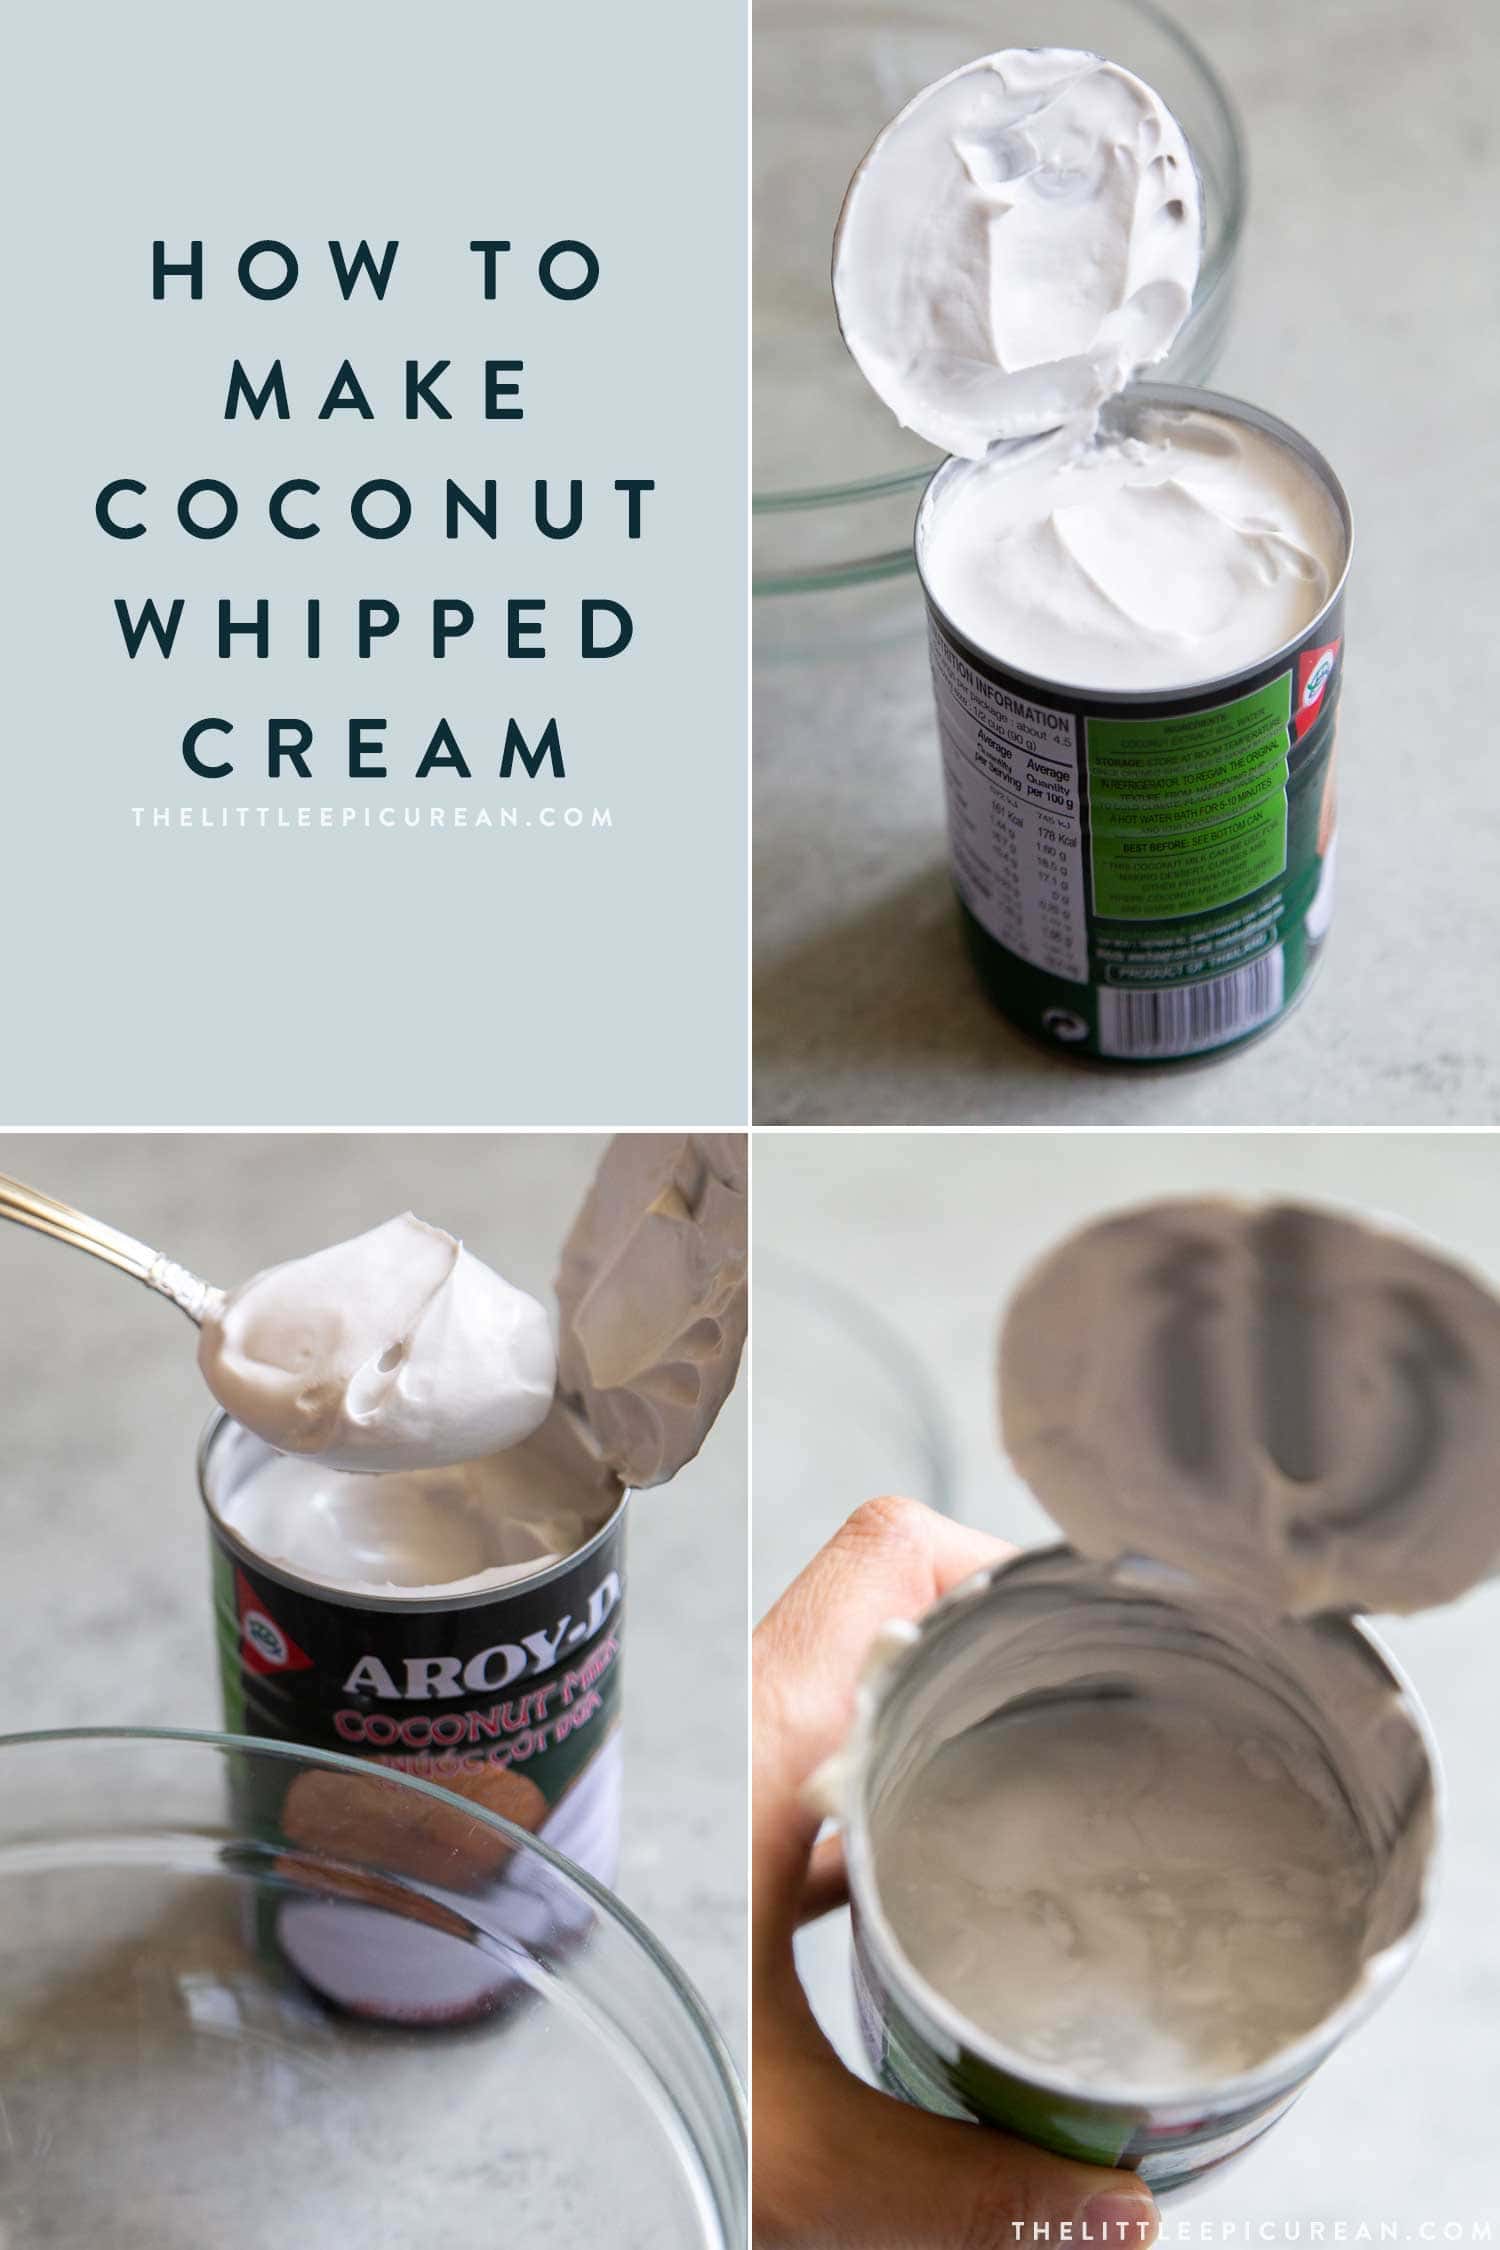 How to make dairy free coconut whipped cream. Chill can of full-fat coconut milk overnight. 